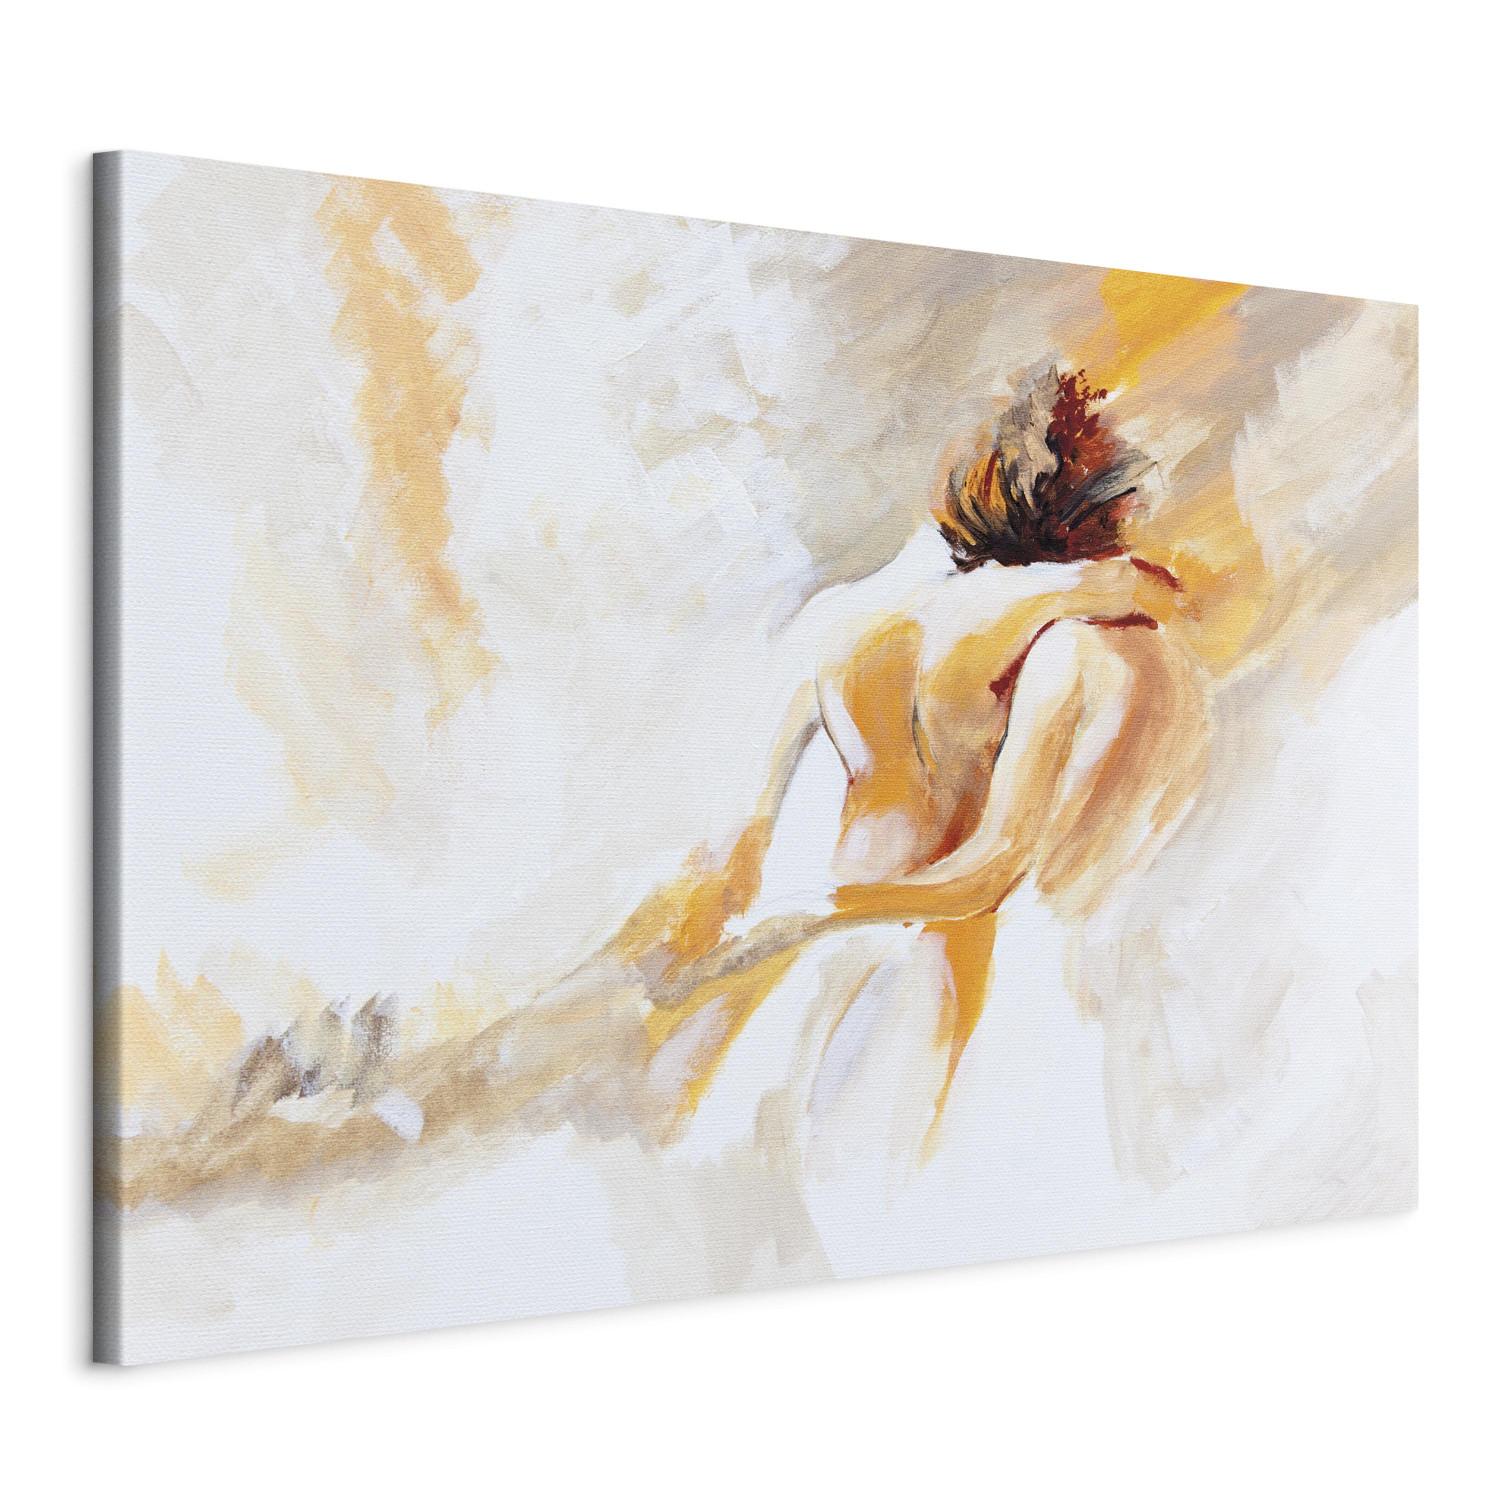 Canvas Couple in Love - Woman and a Man in a Tender Loving Embrace